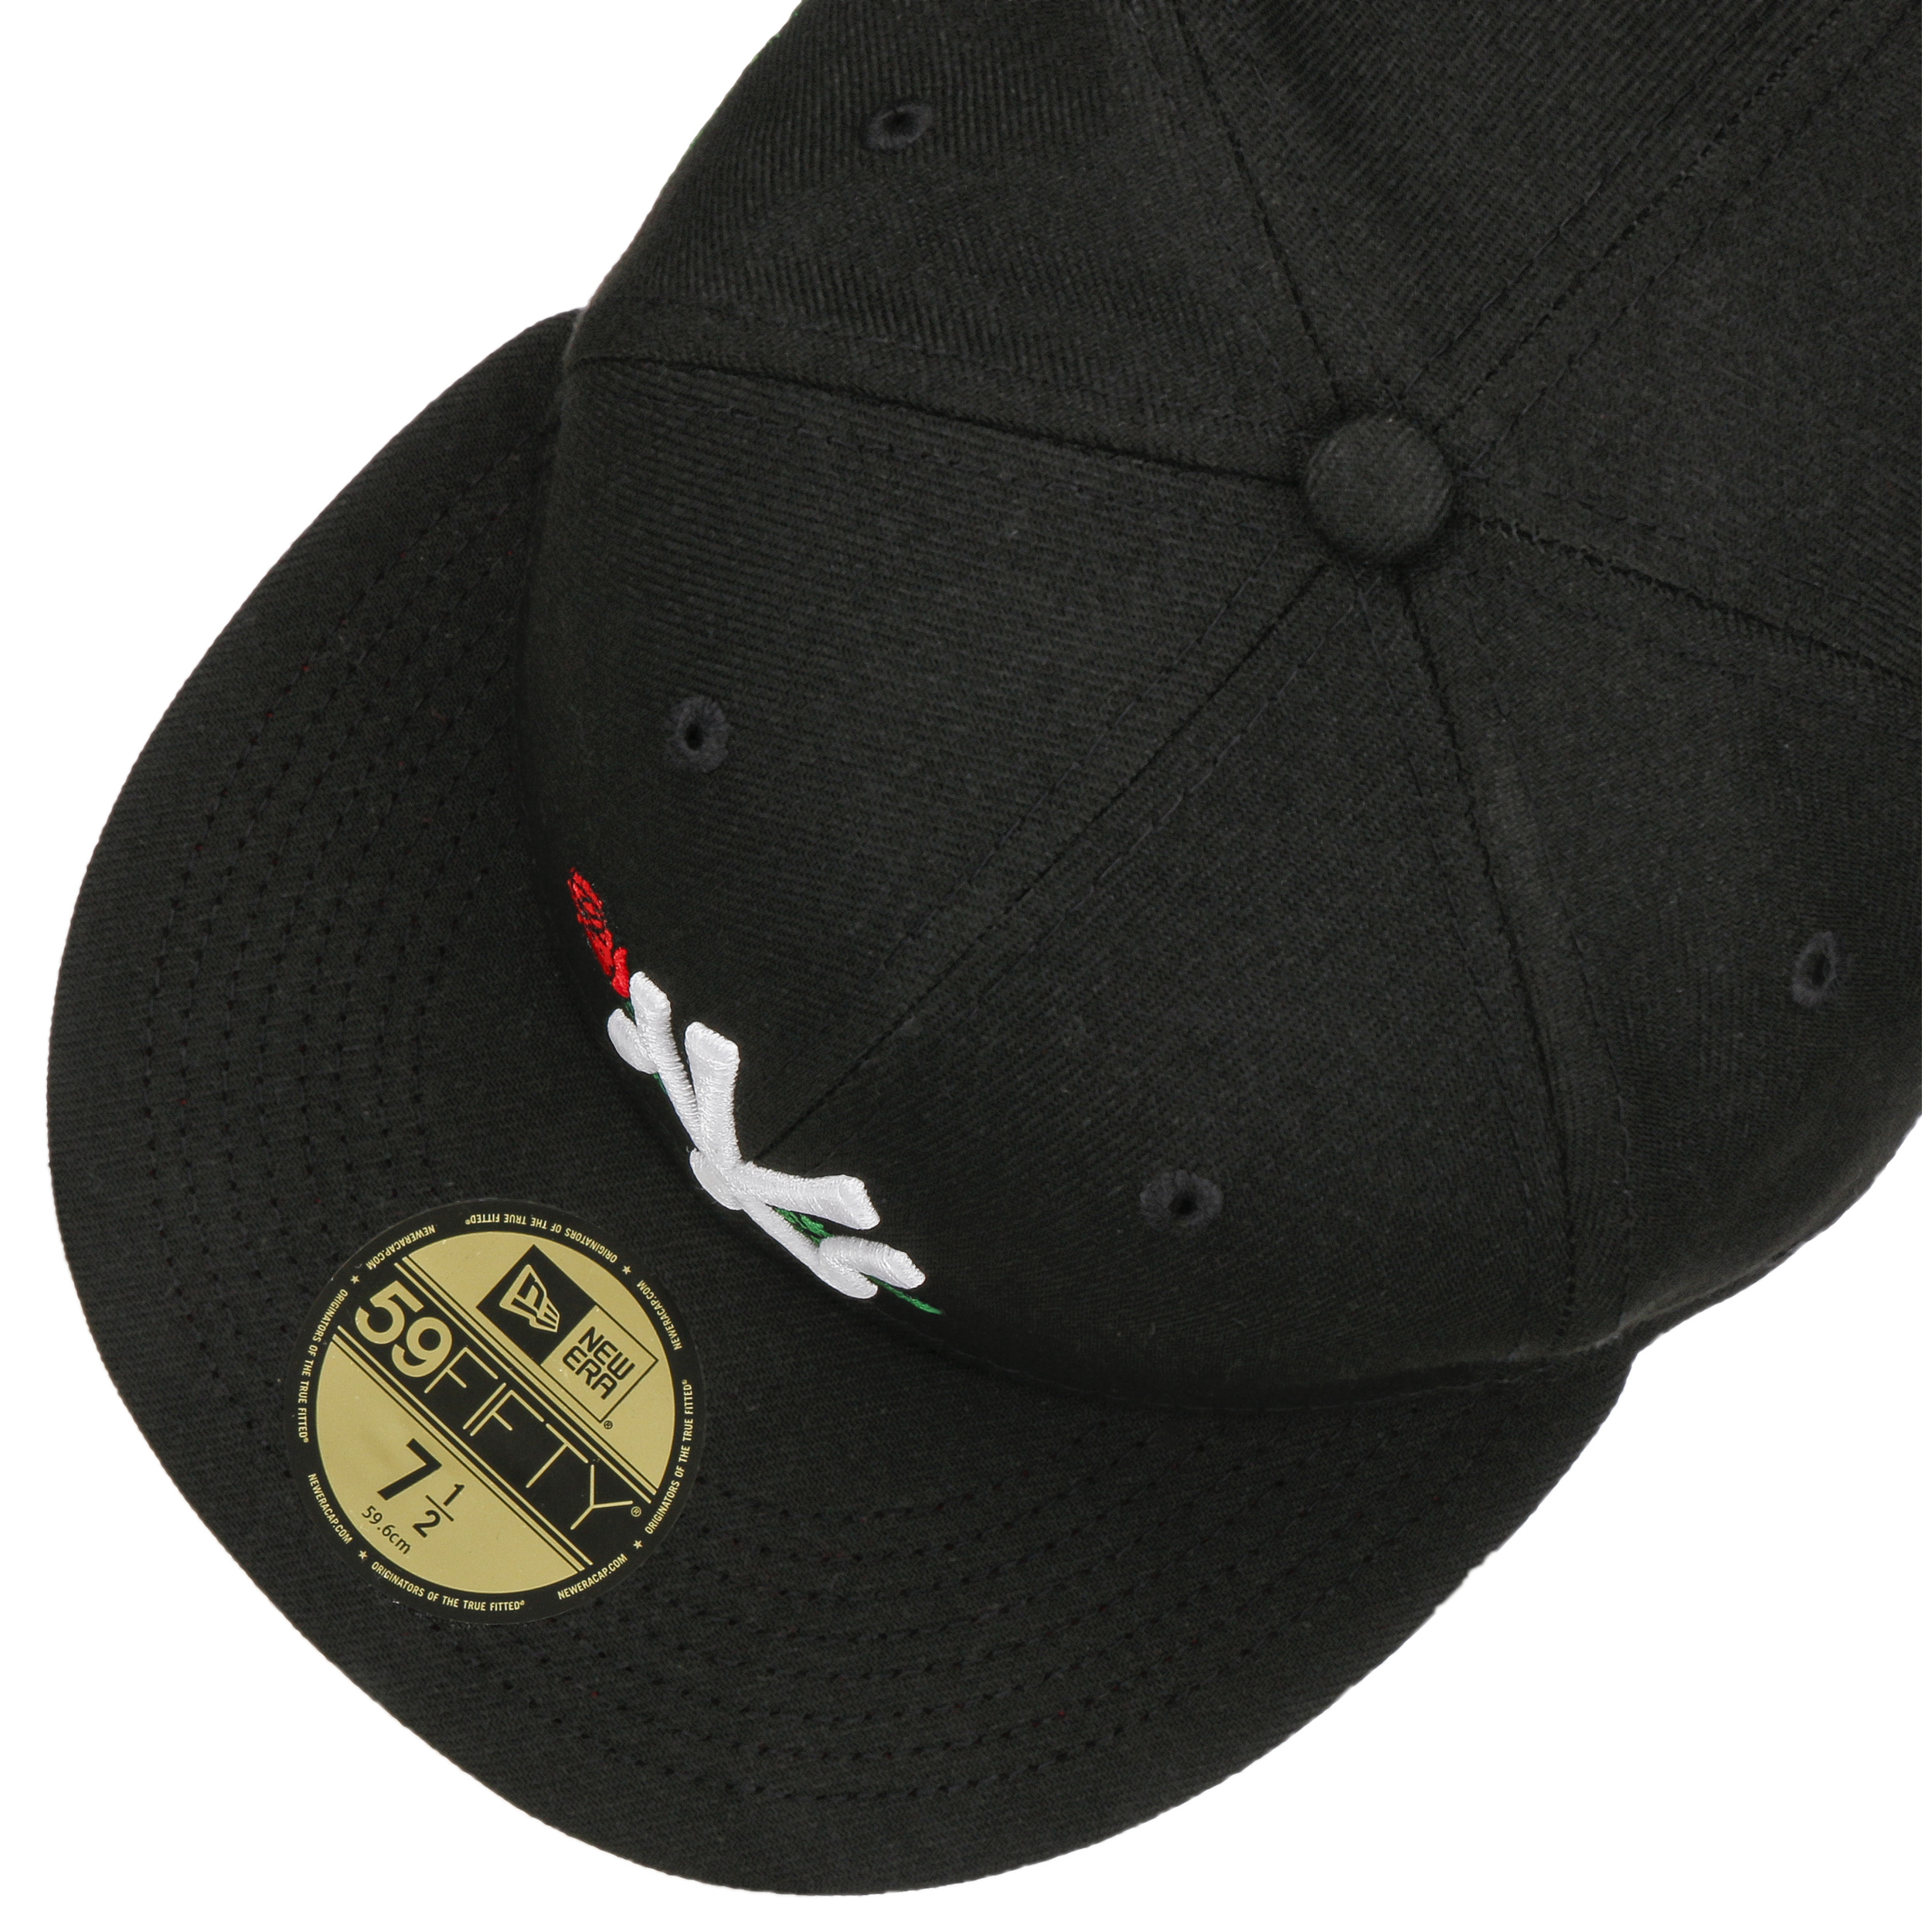 New Era Cappellino 59Fifty Rose Apple YankeesEra Berretto Baseball Cappello Hiphop Fitted cap 